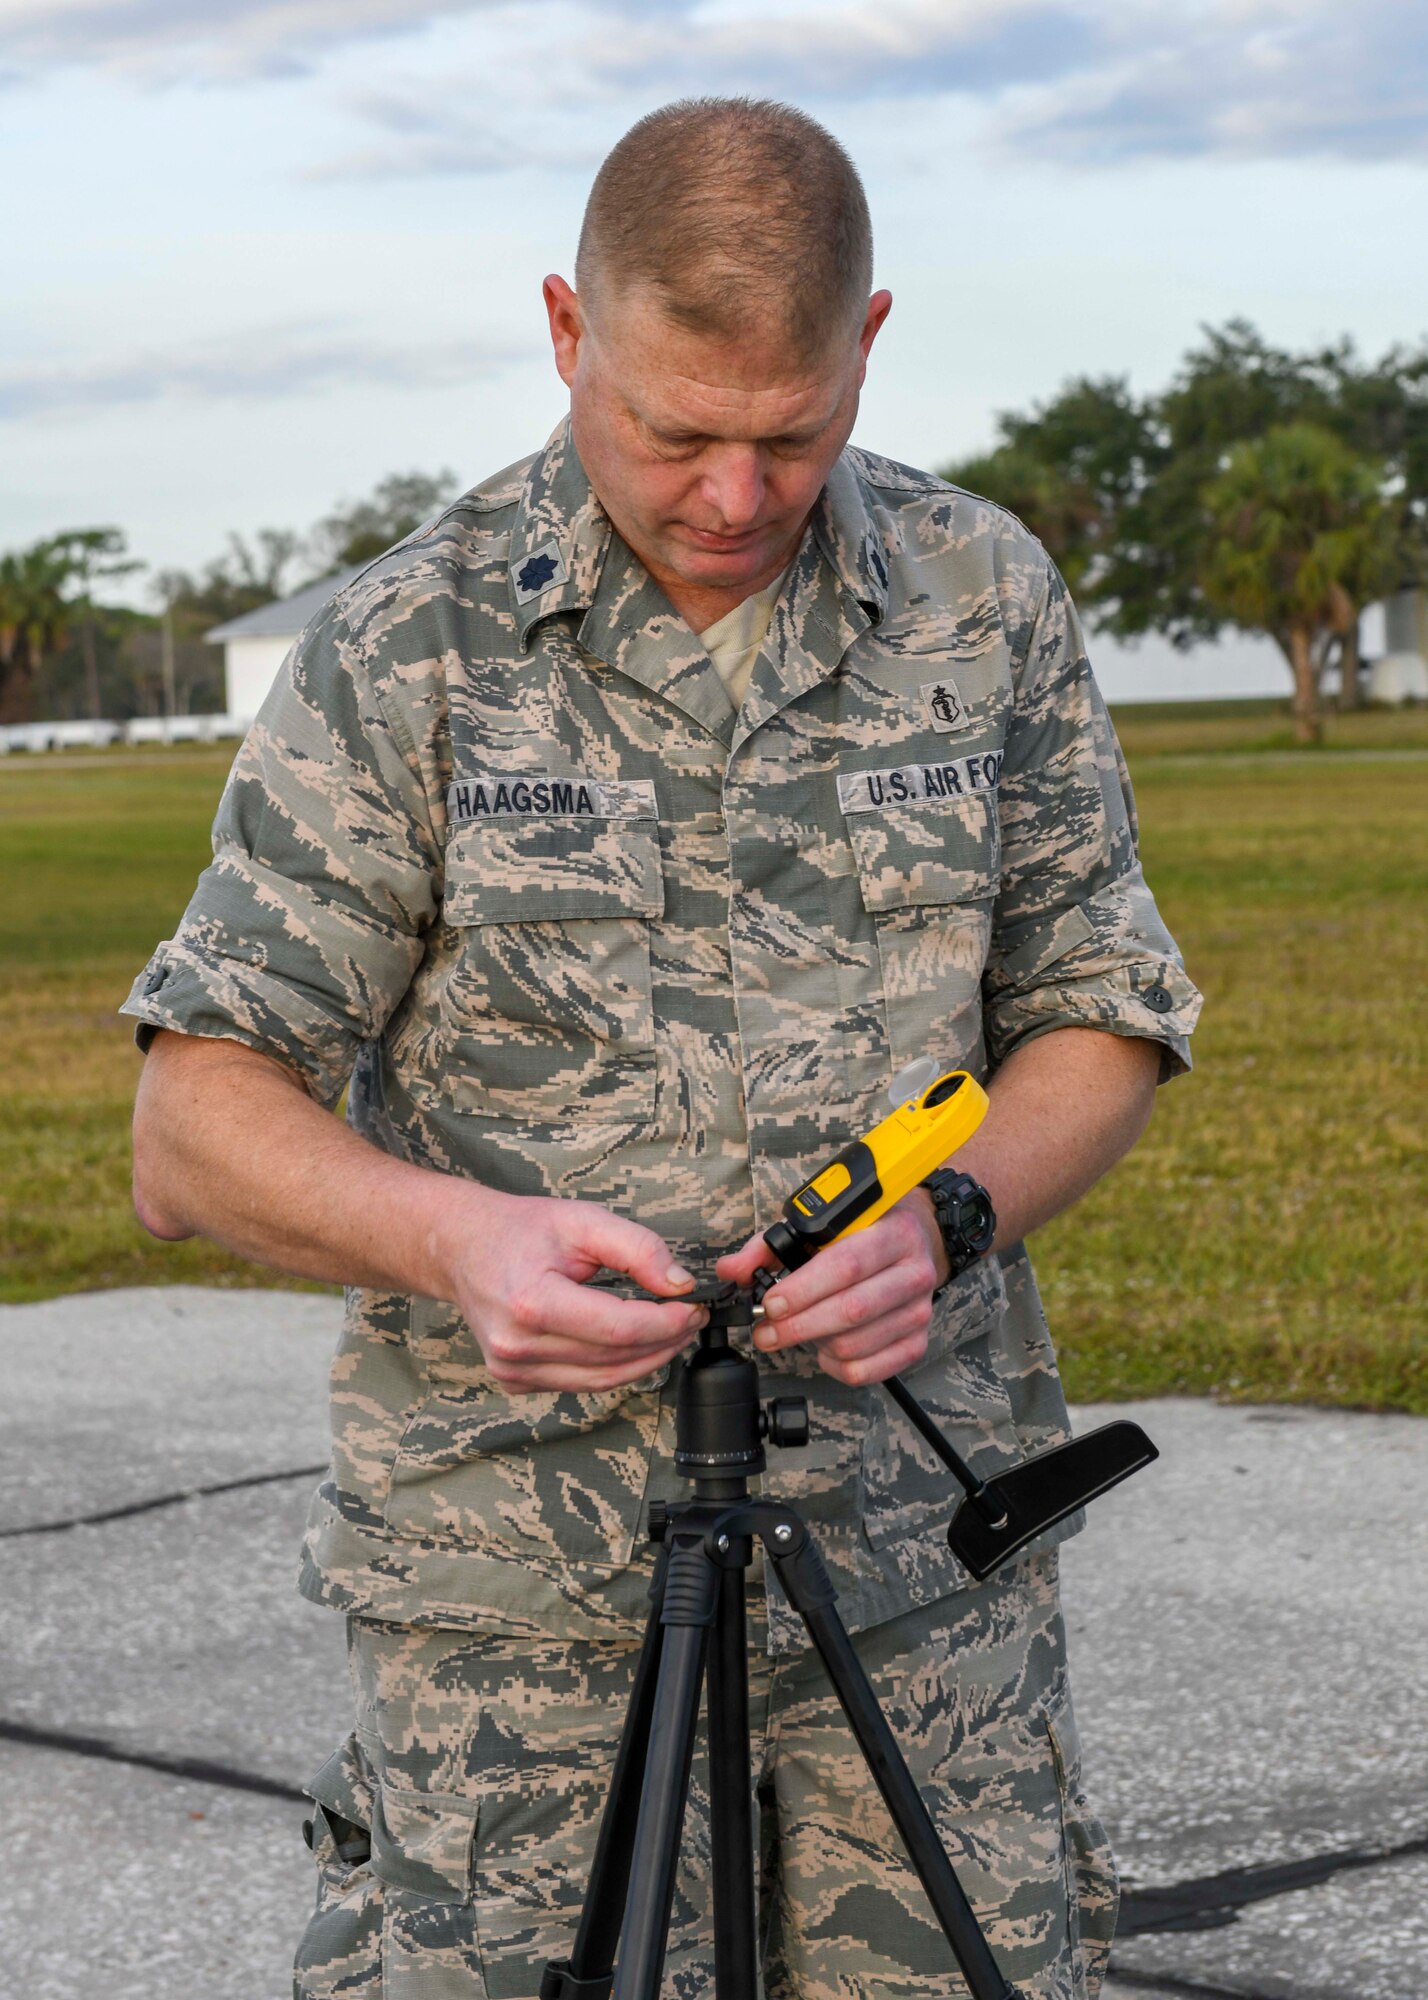 Lt. Col. Karl Haagsma, an entomologist assigned to the 910th Airlift Wing’s 757th Airlift Squadron, disassembles an anemometer (weather meter) Jan. 9, 2019 at the Buckingham Air Field at the Lee County Mosquito Control District facilities in Lehigh Acres, Florida during a Department of Defense aerial spray course.